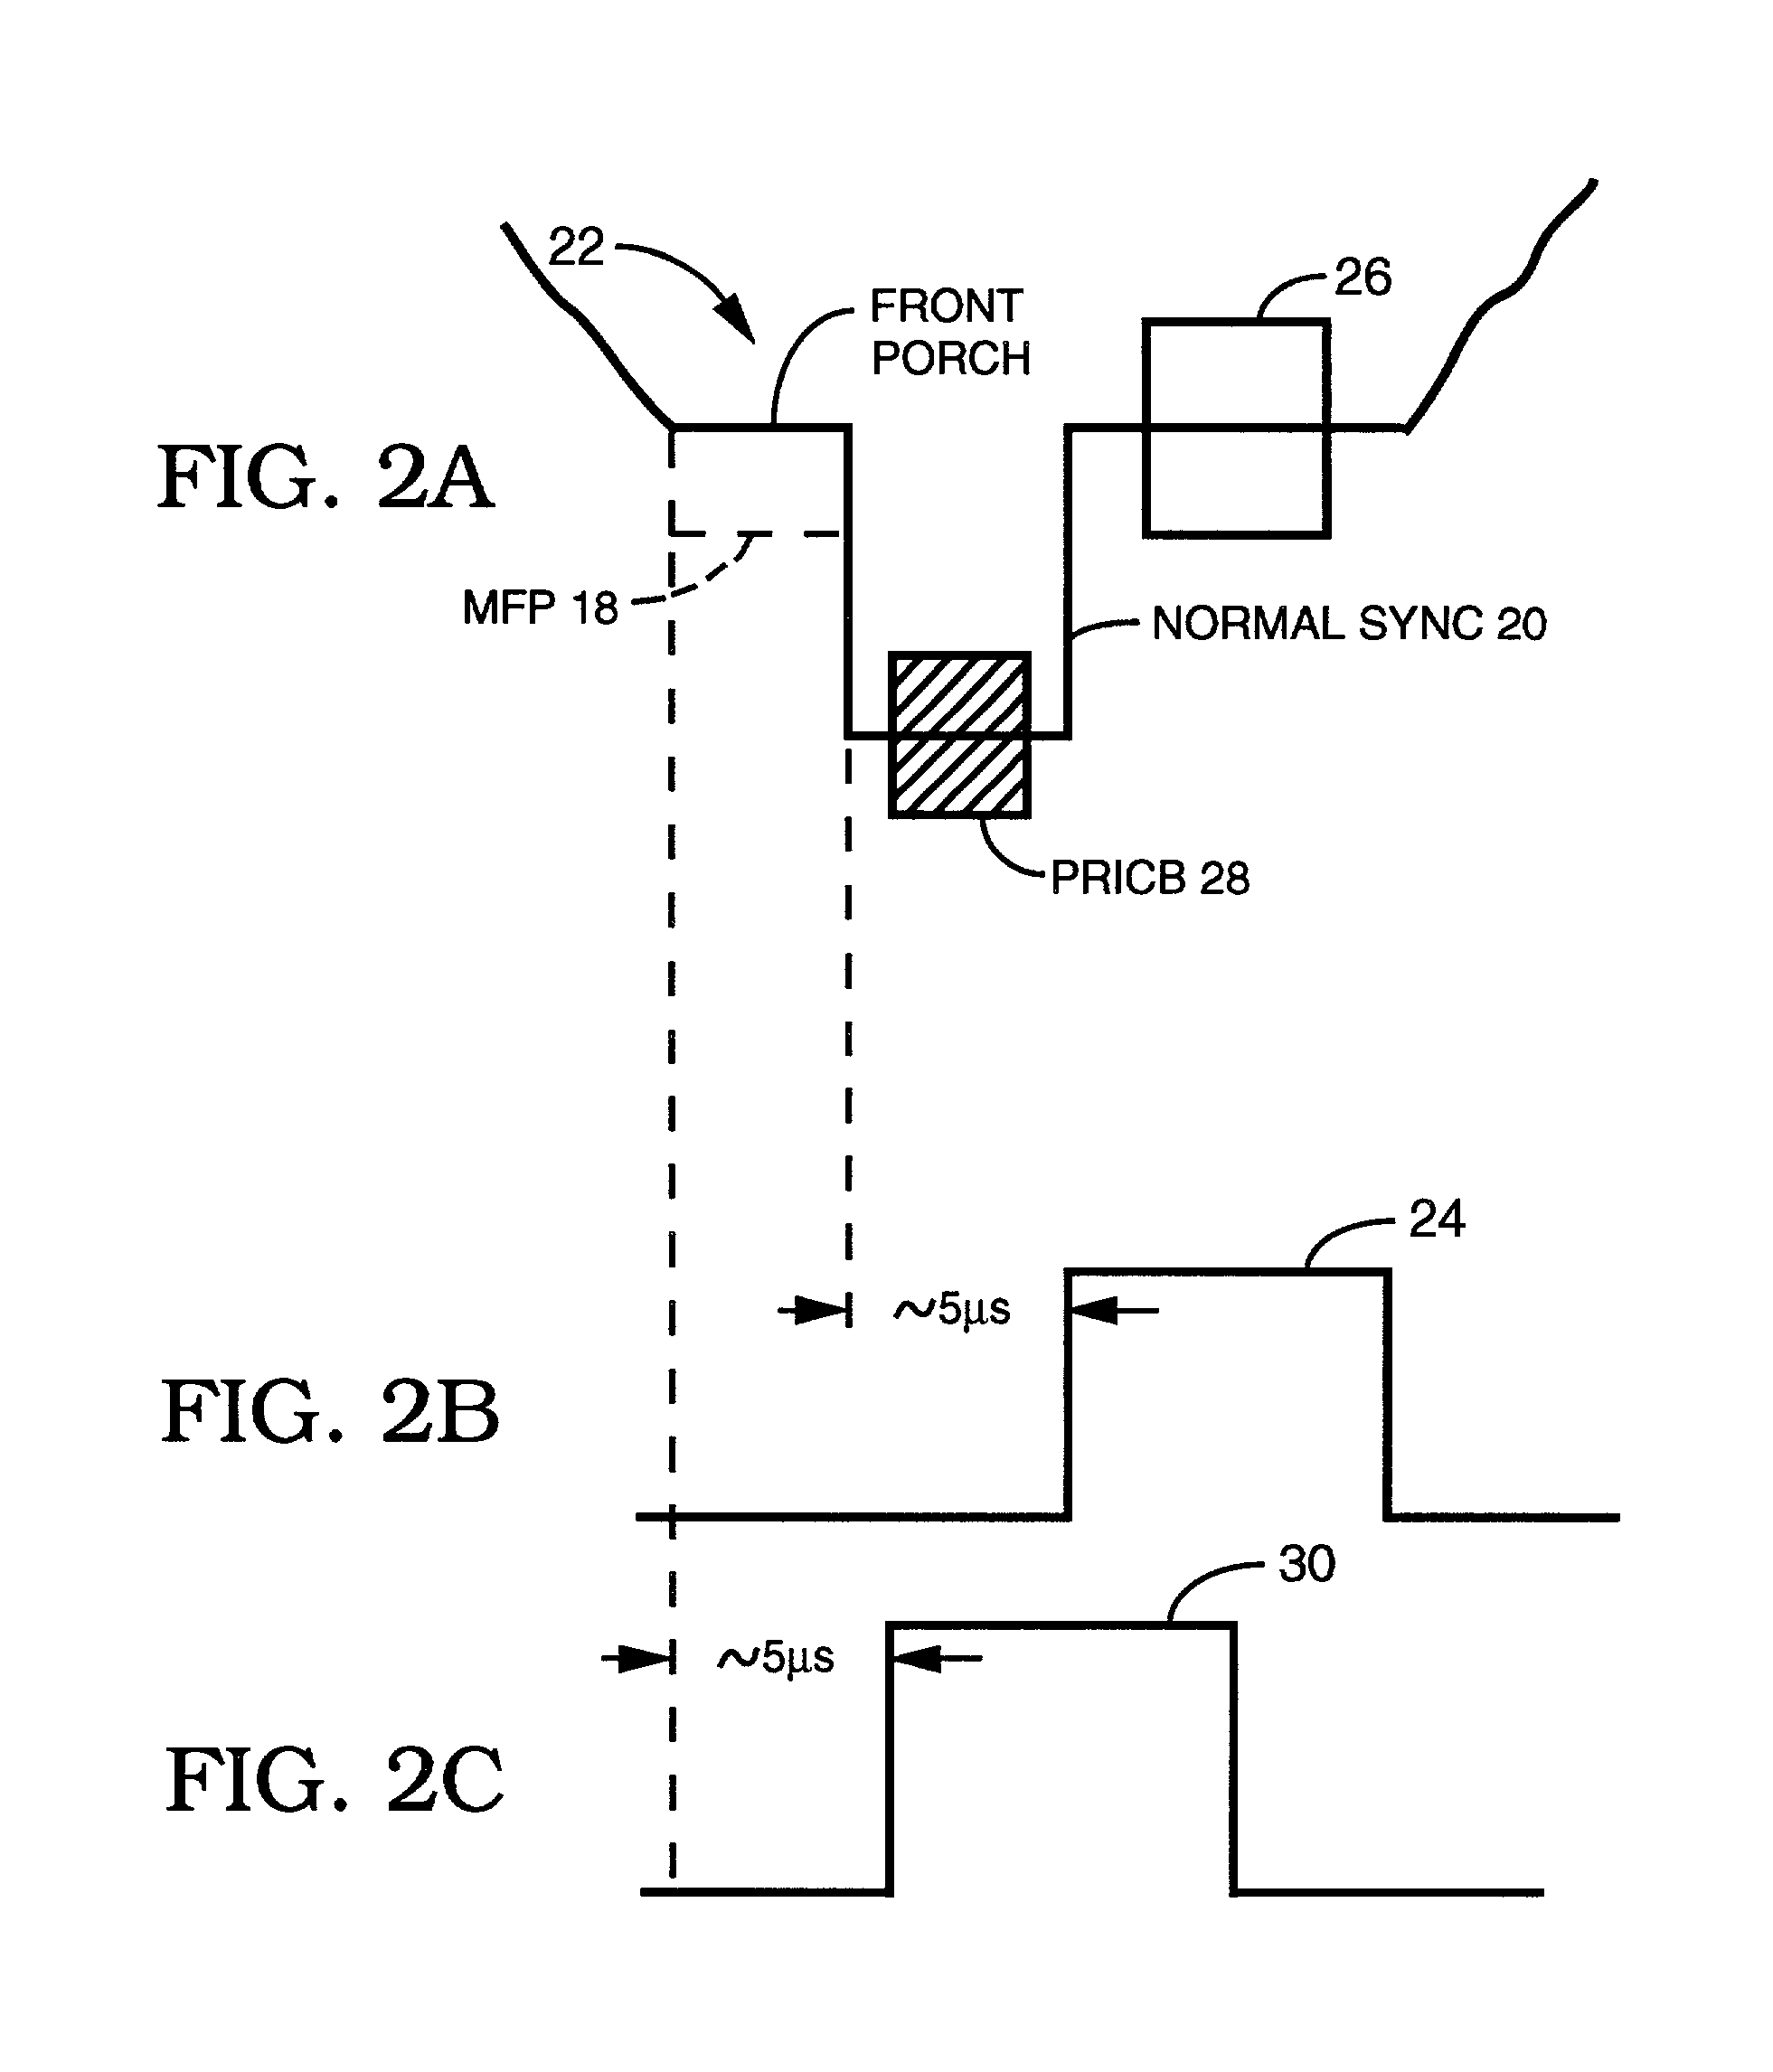 Method and apparatus for synthesizing or modifying a copy protection signal using a lowered signal level portion